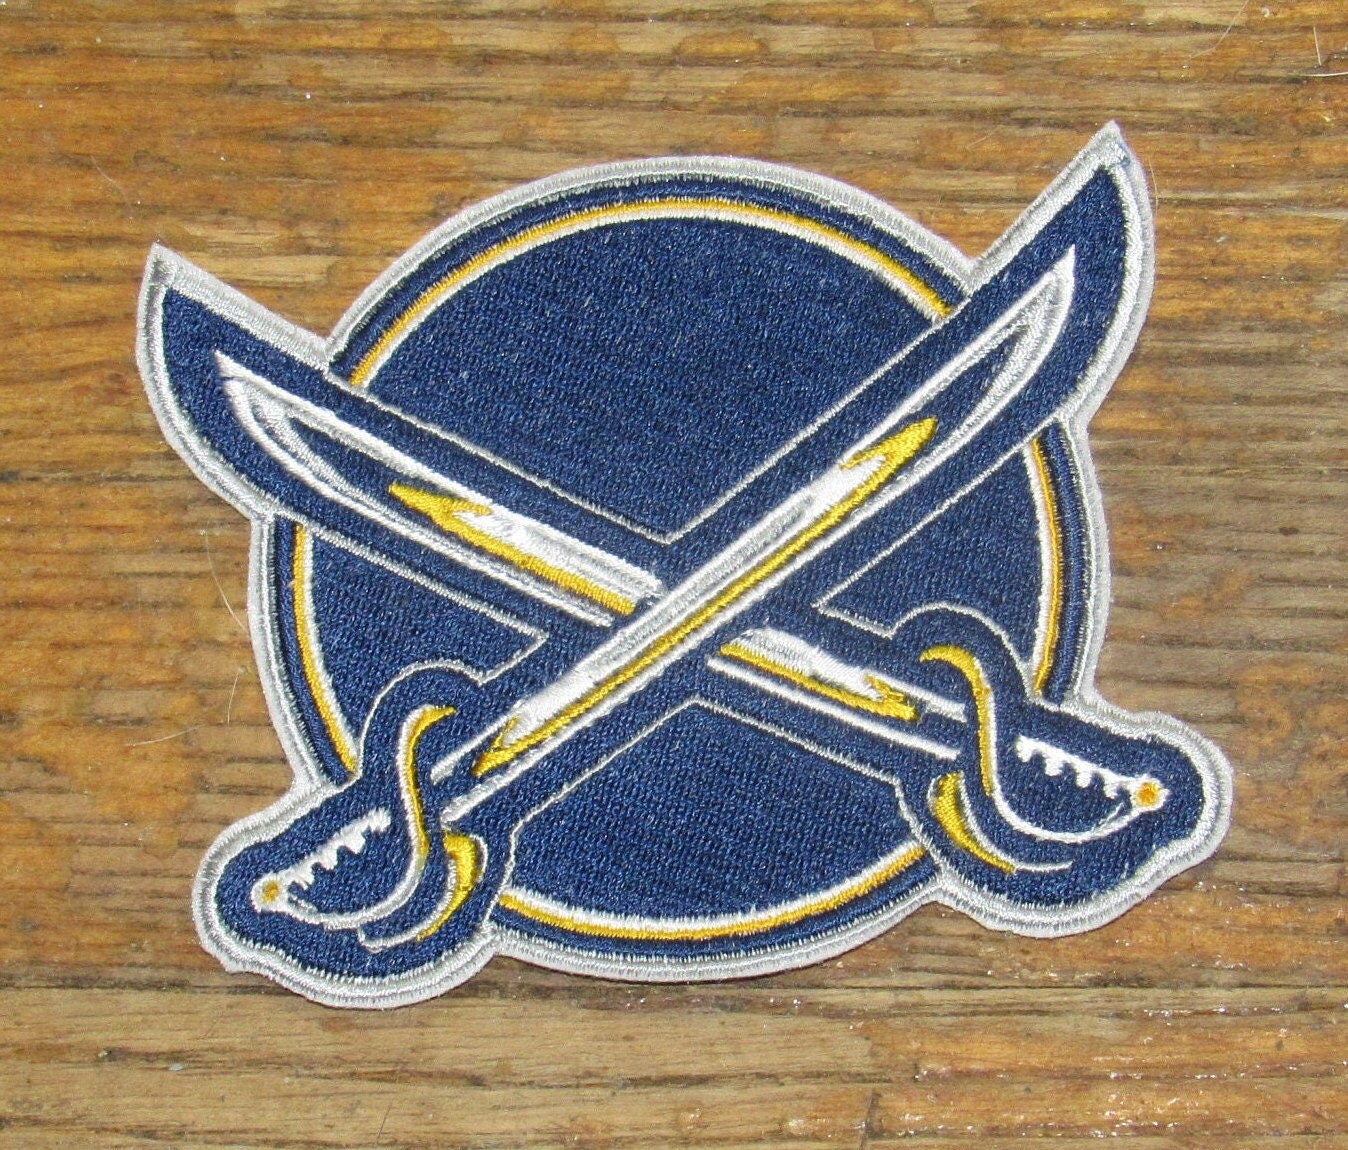 NHL Logo Patch, Embroidered Iron-on, Size: 3.3 x 4 inches